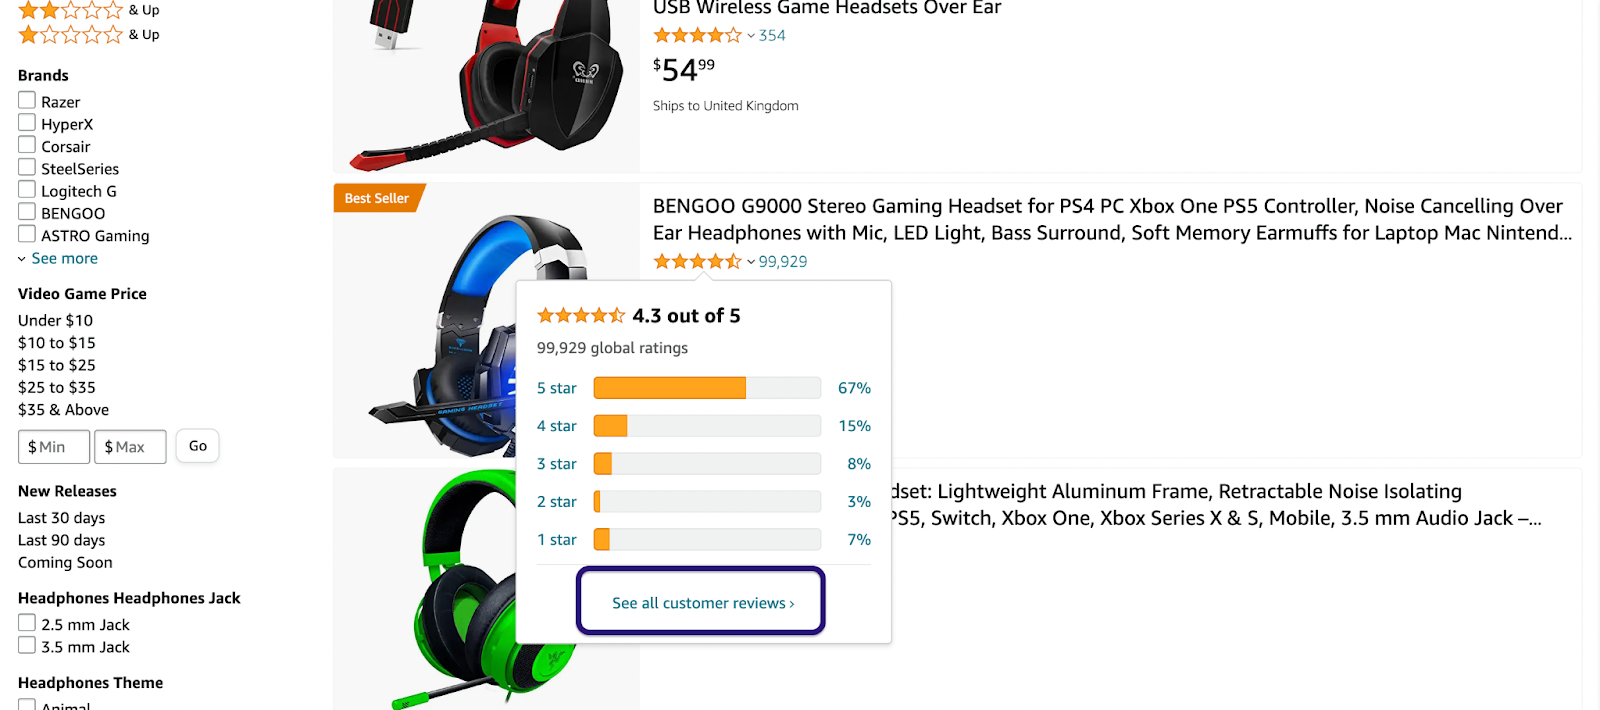 The image Customer reviews for a specific gaming headset brand. 